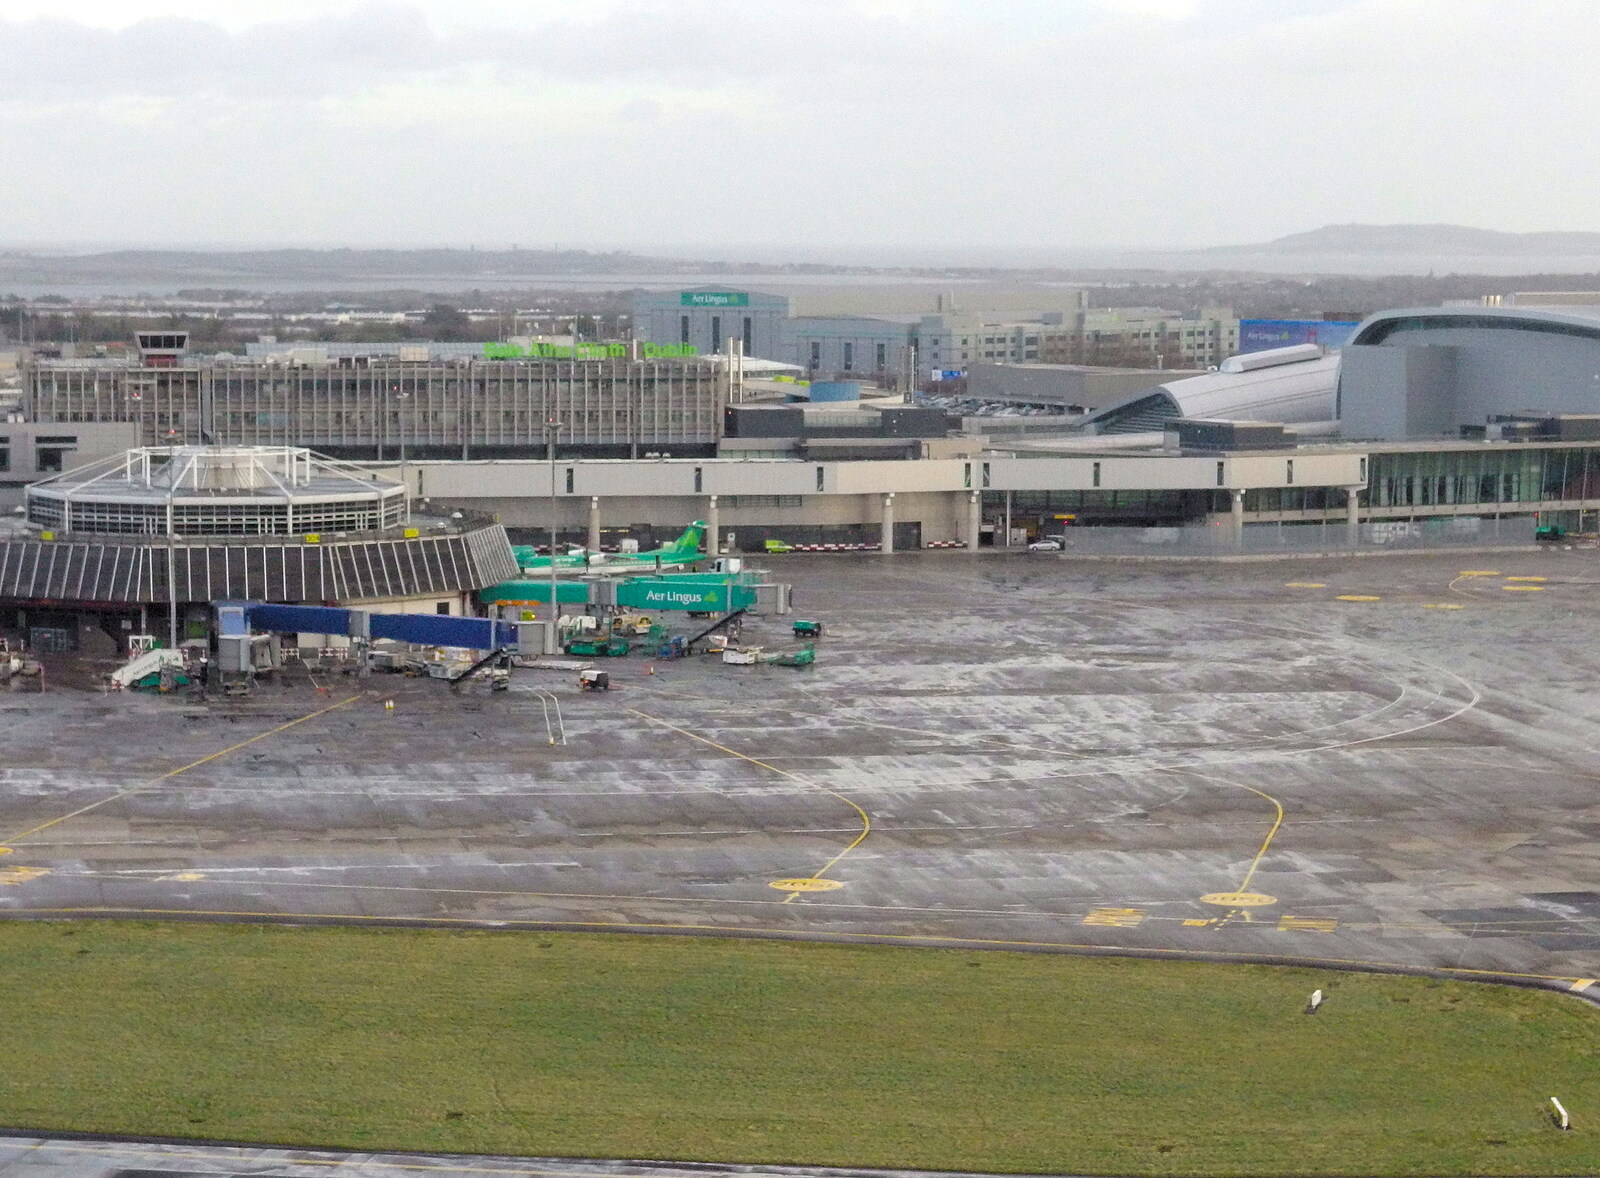 The old Terminal 1 at Dublin from Dun Laoghaire and an Electrical Disaster, Monkstown, County Dublin, Ireland - 4th January 2014